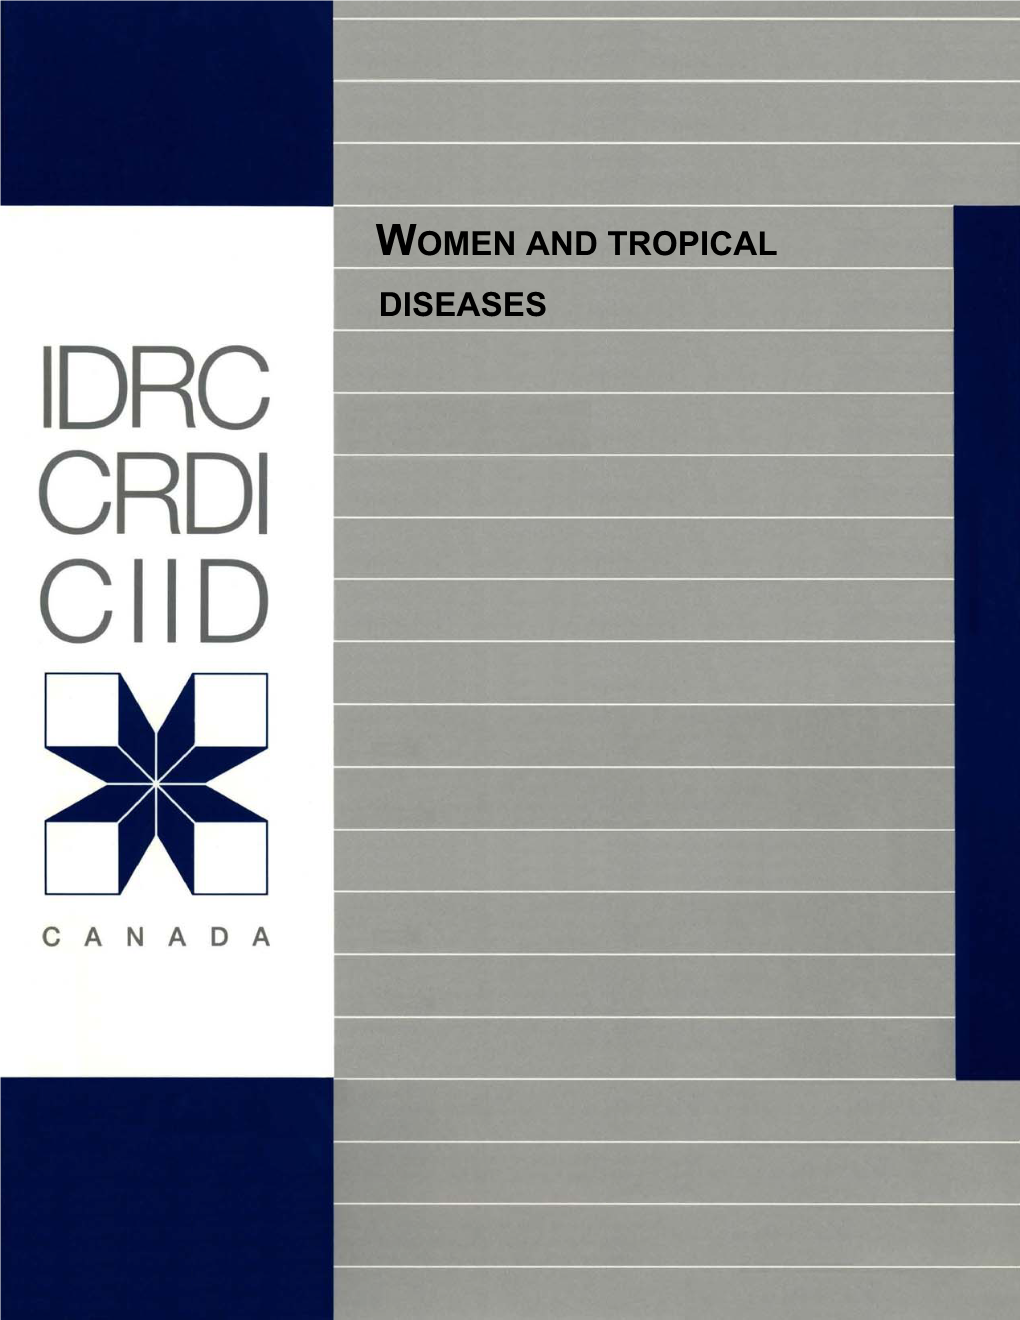 Women and Tropical Diseases